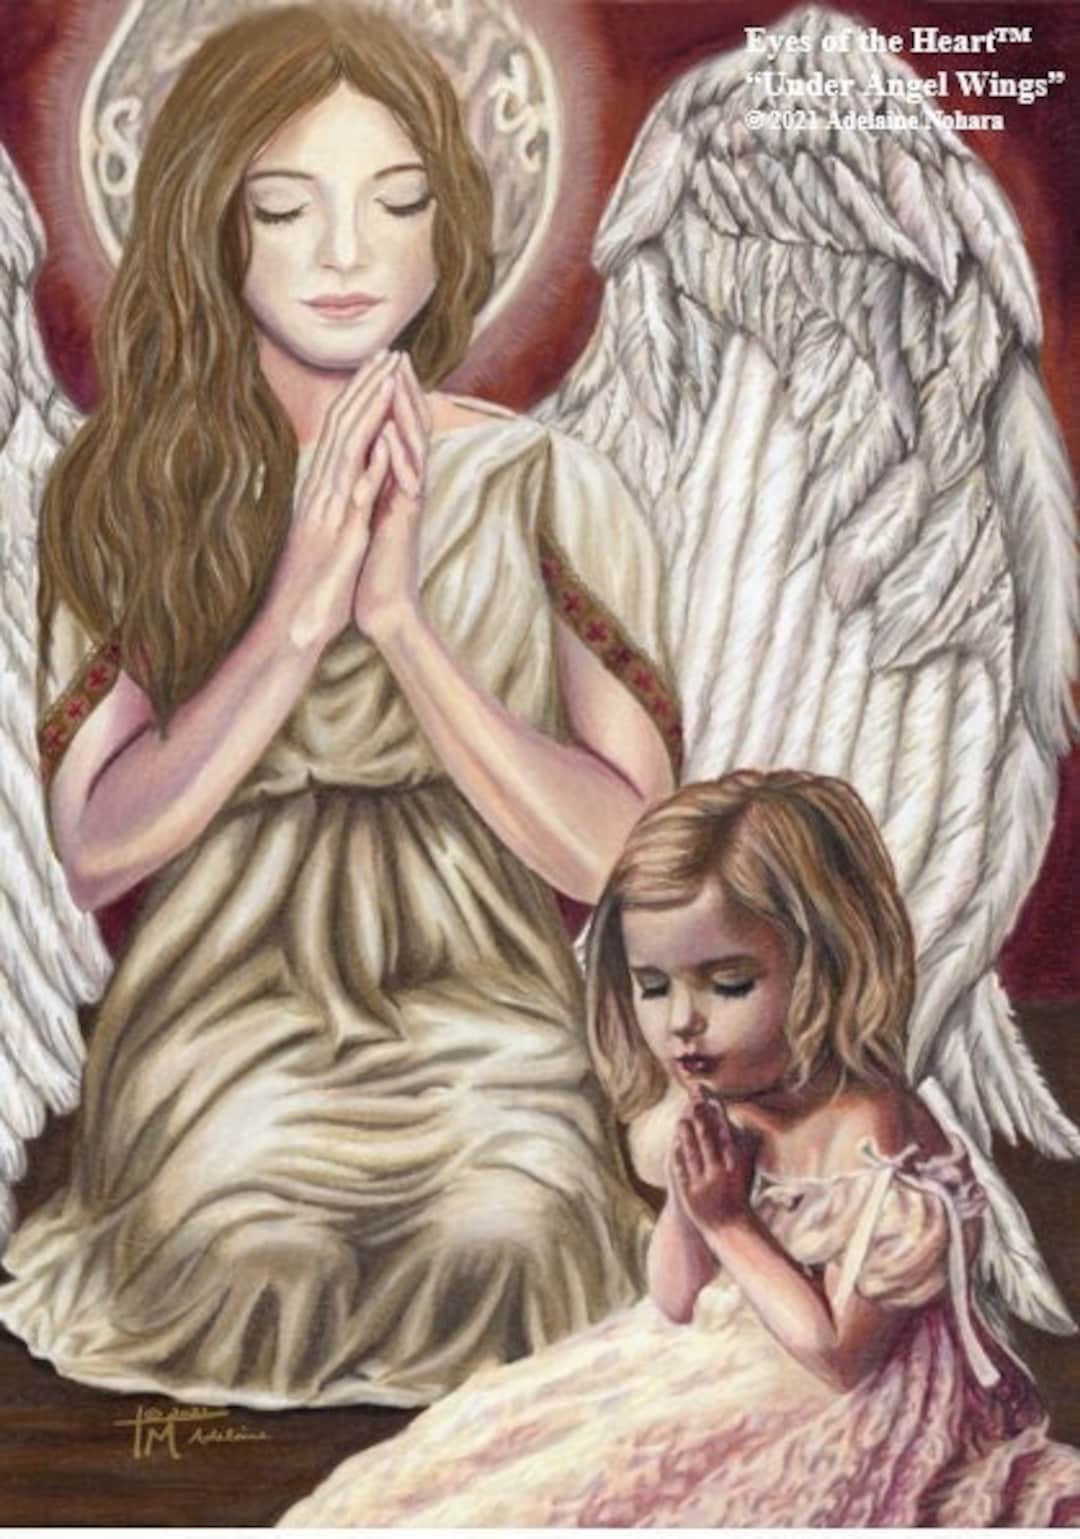 Home - Guardian Angels